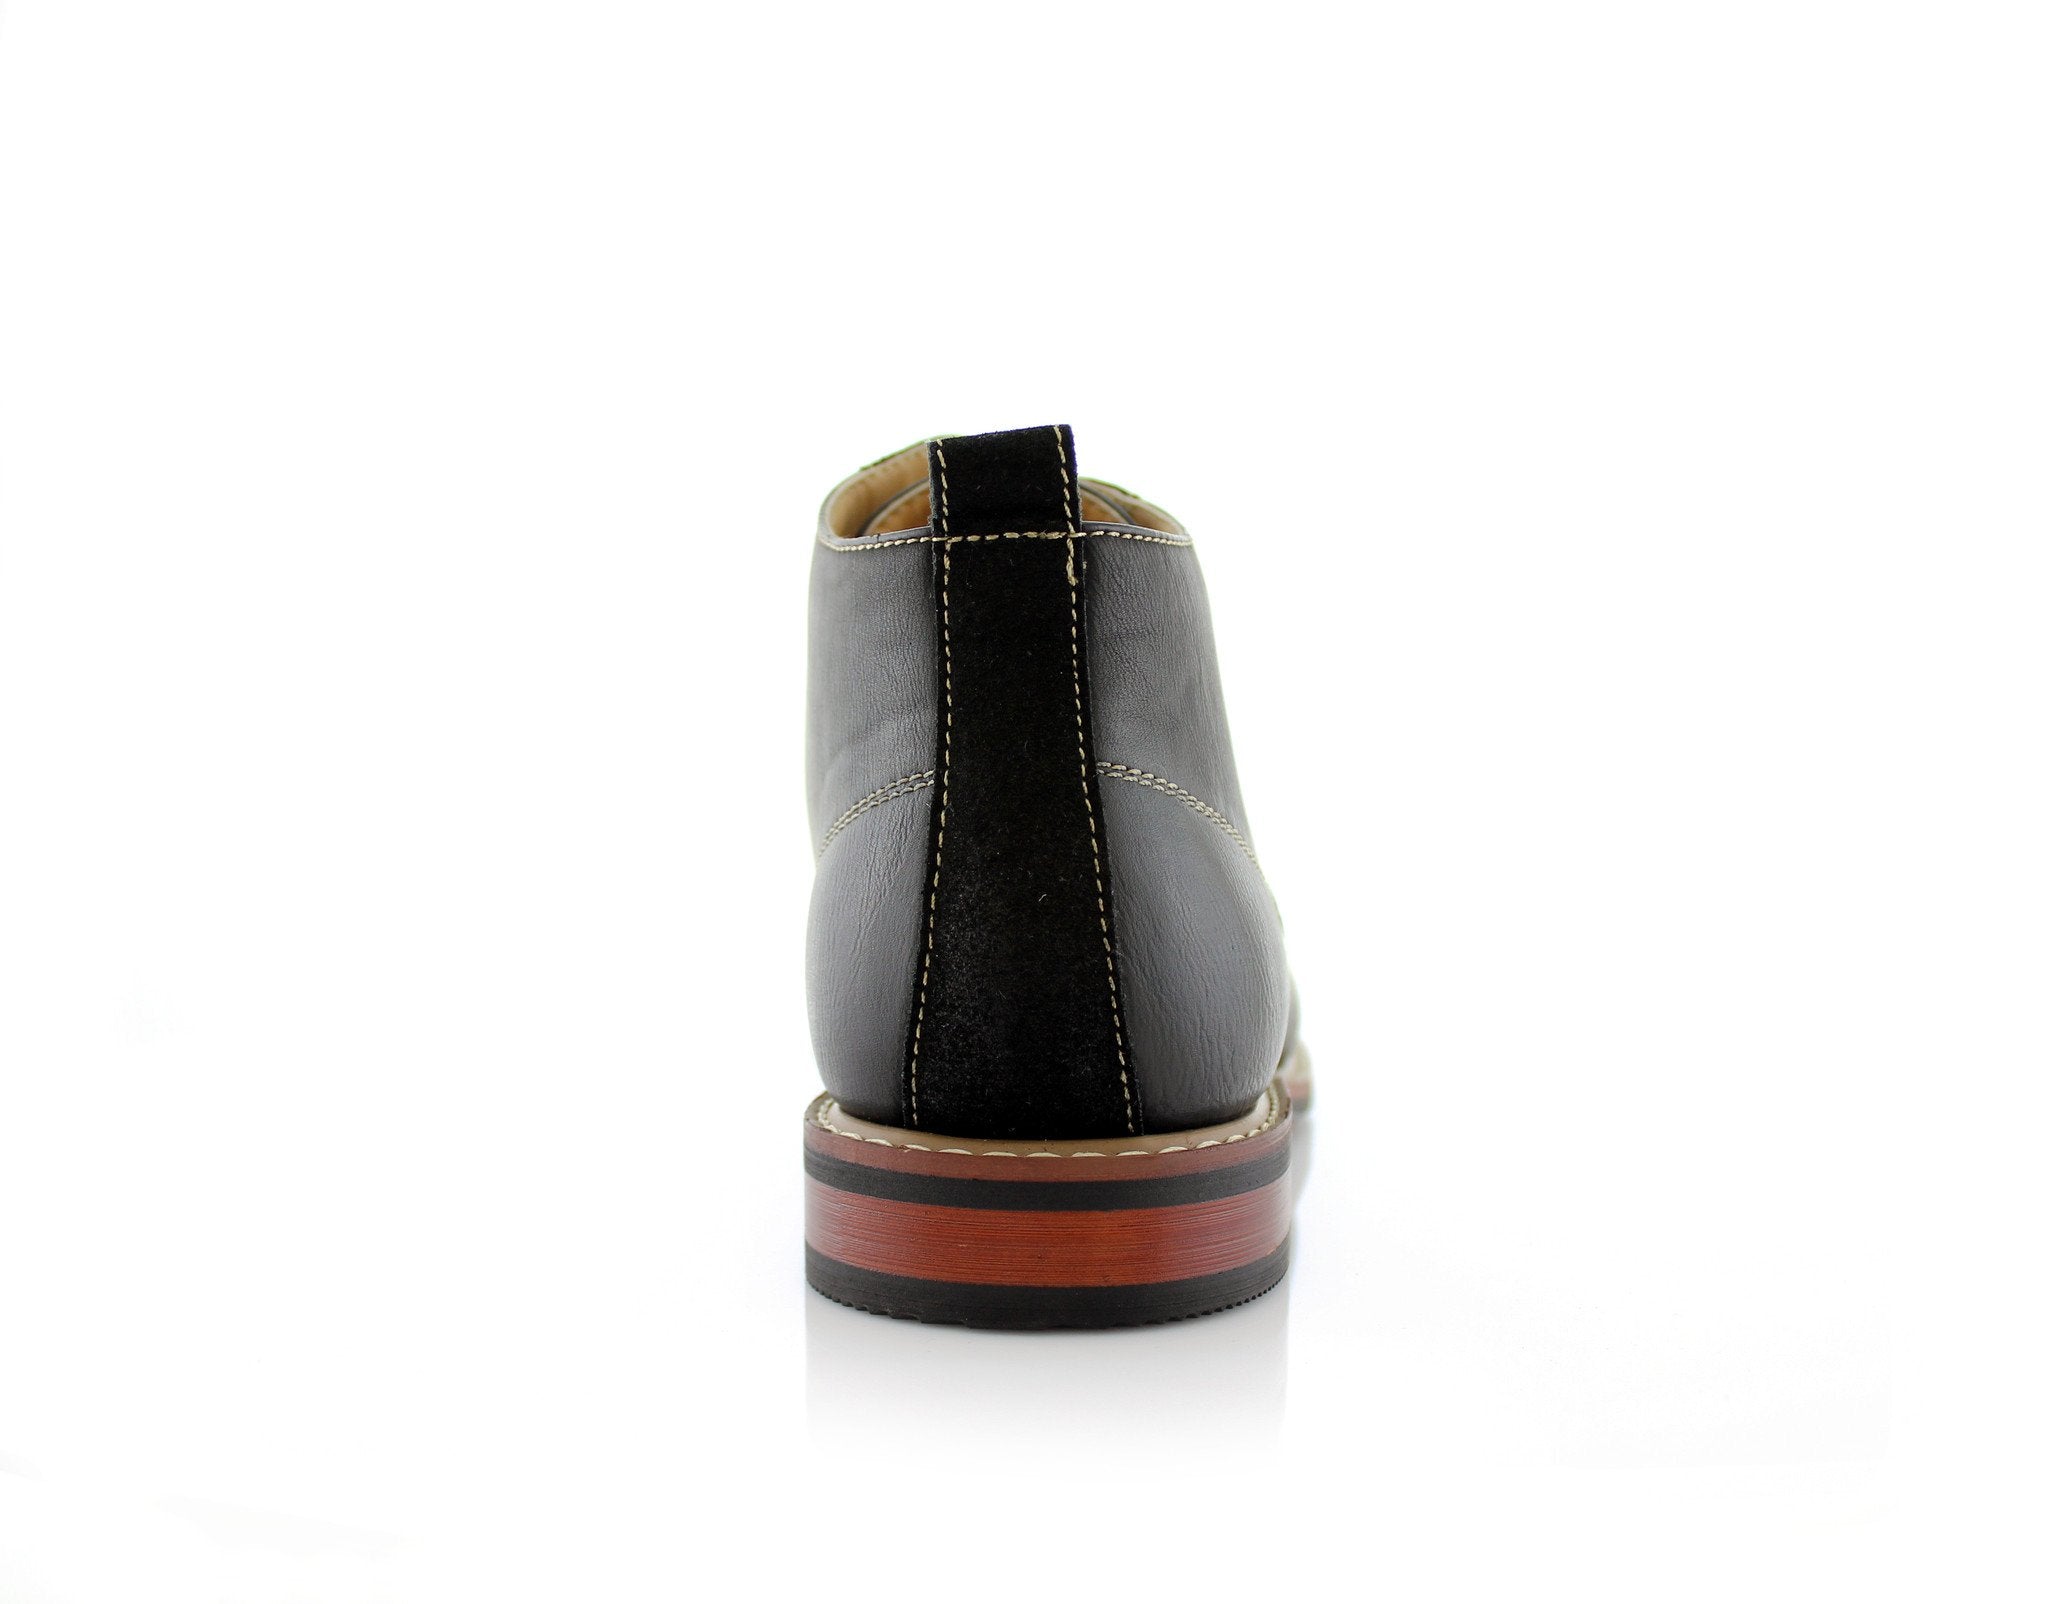 Duo-Textured Ankle Derby Boots | Eli by Ferro Aldo | Conal Footwear | Back Angle View